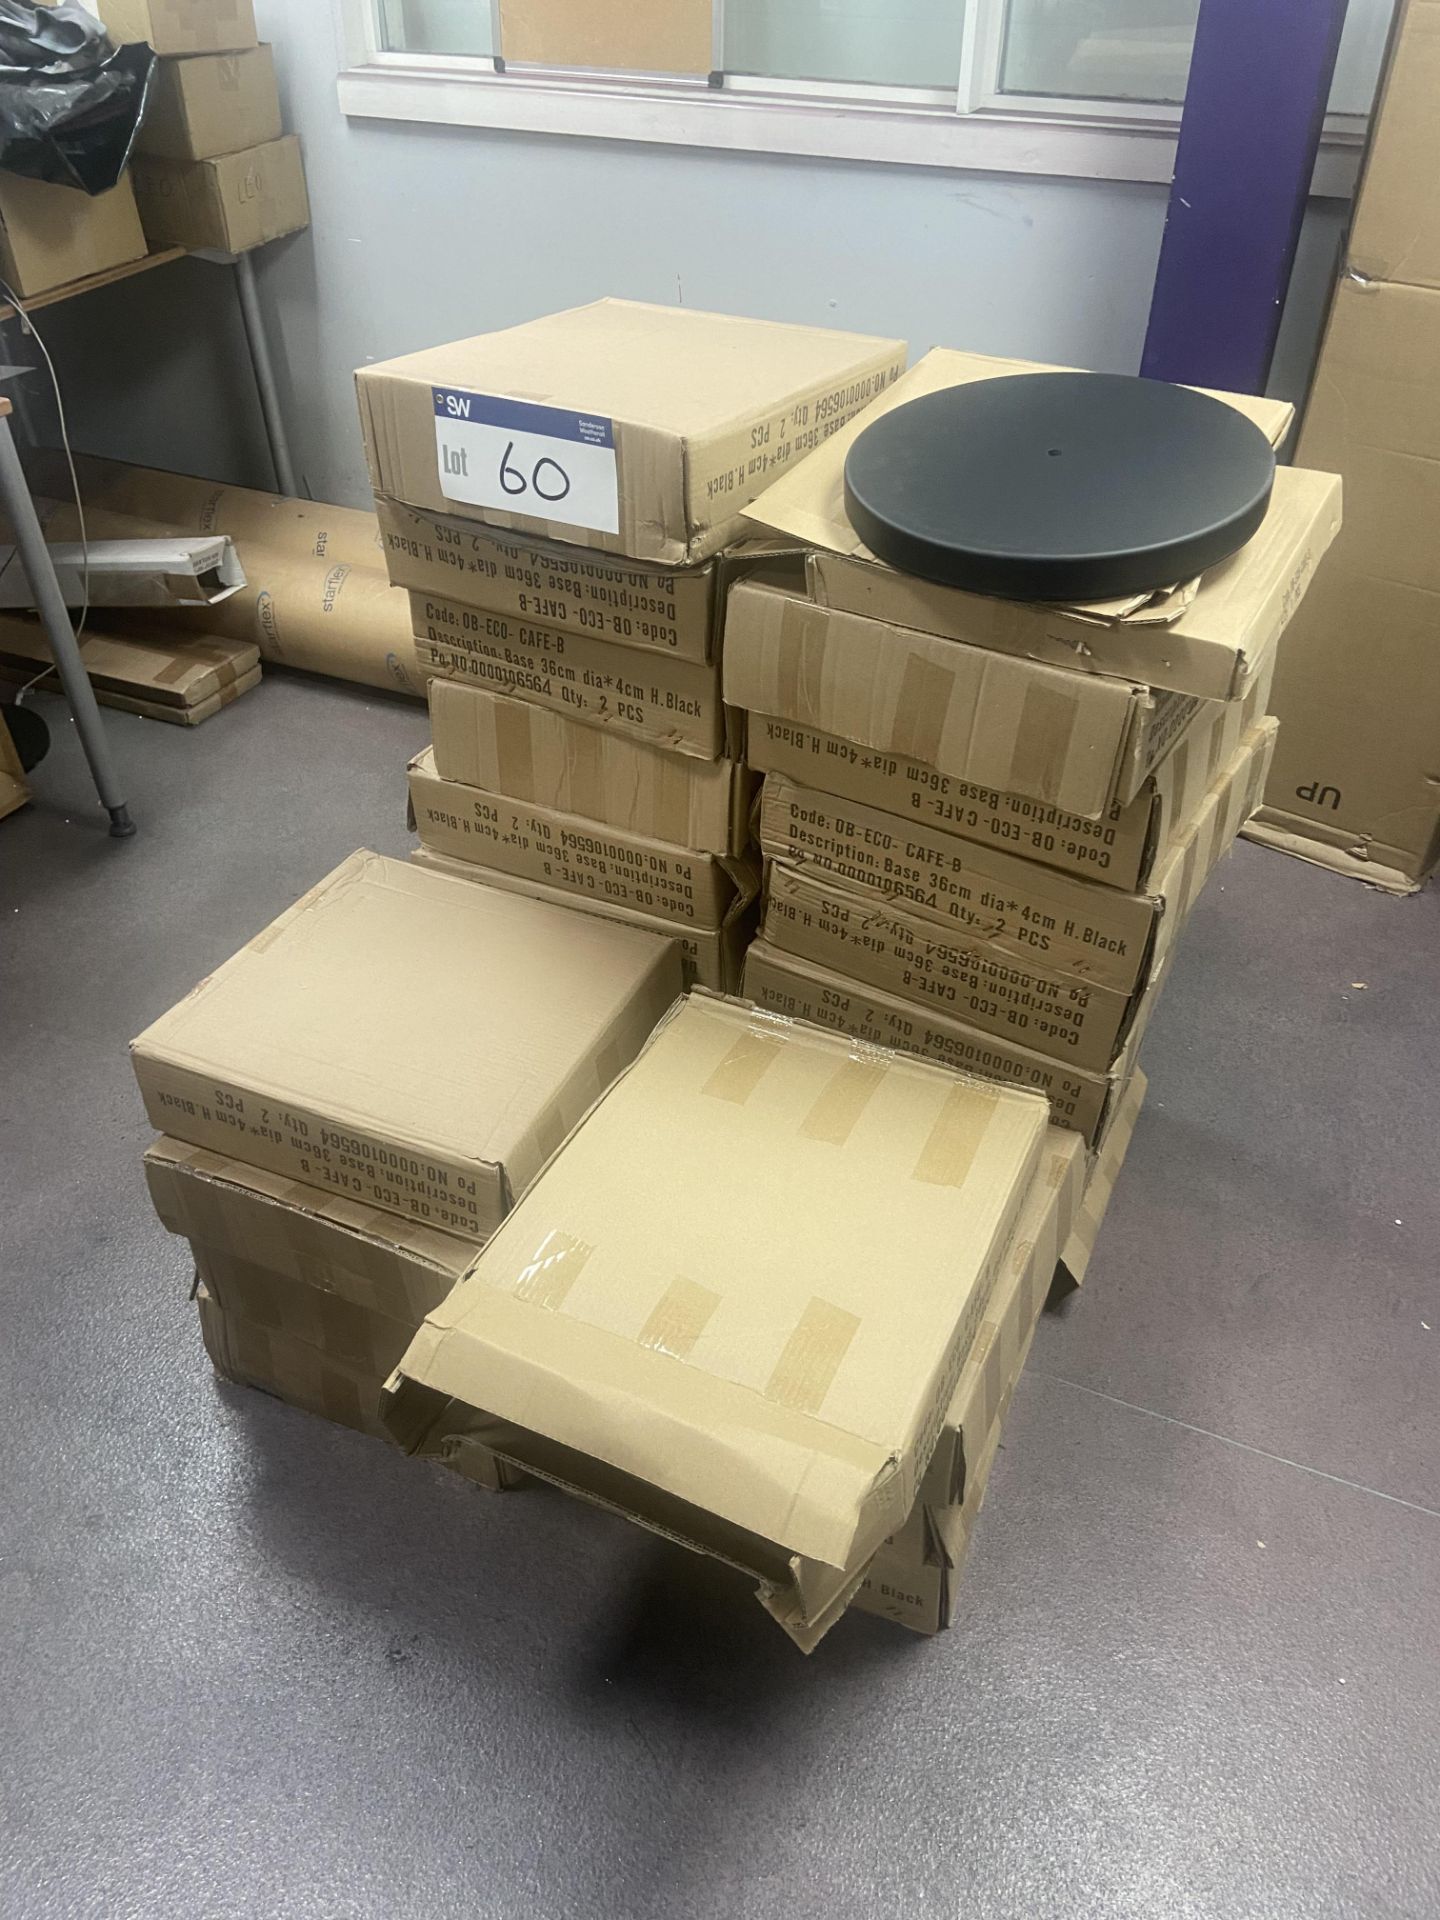 Approx. 25 Boxes of Exhibition Stand Bases, two per box Please read the following important